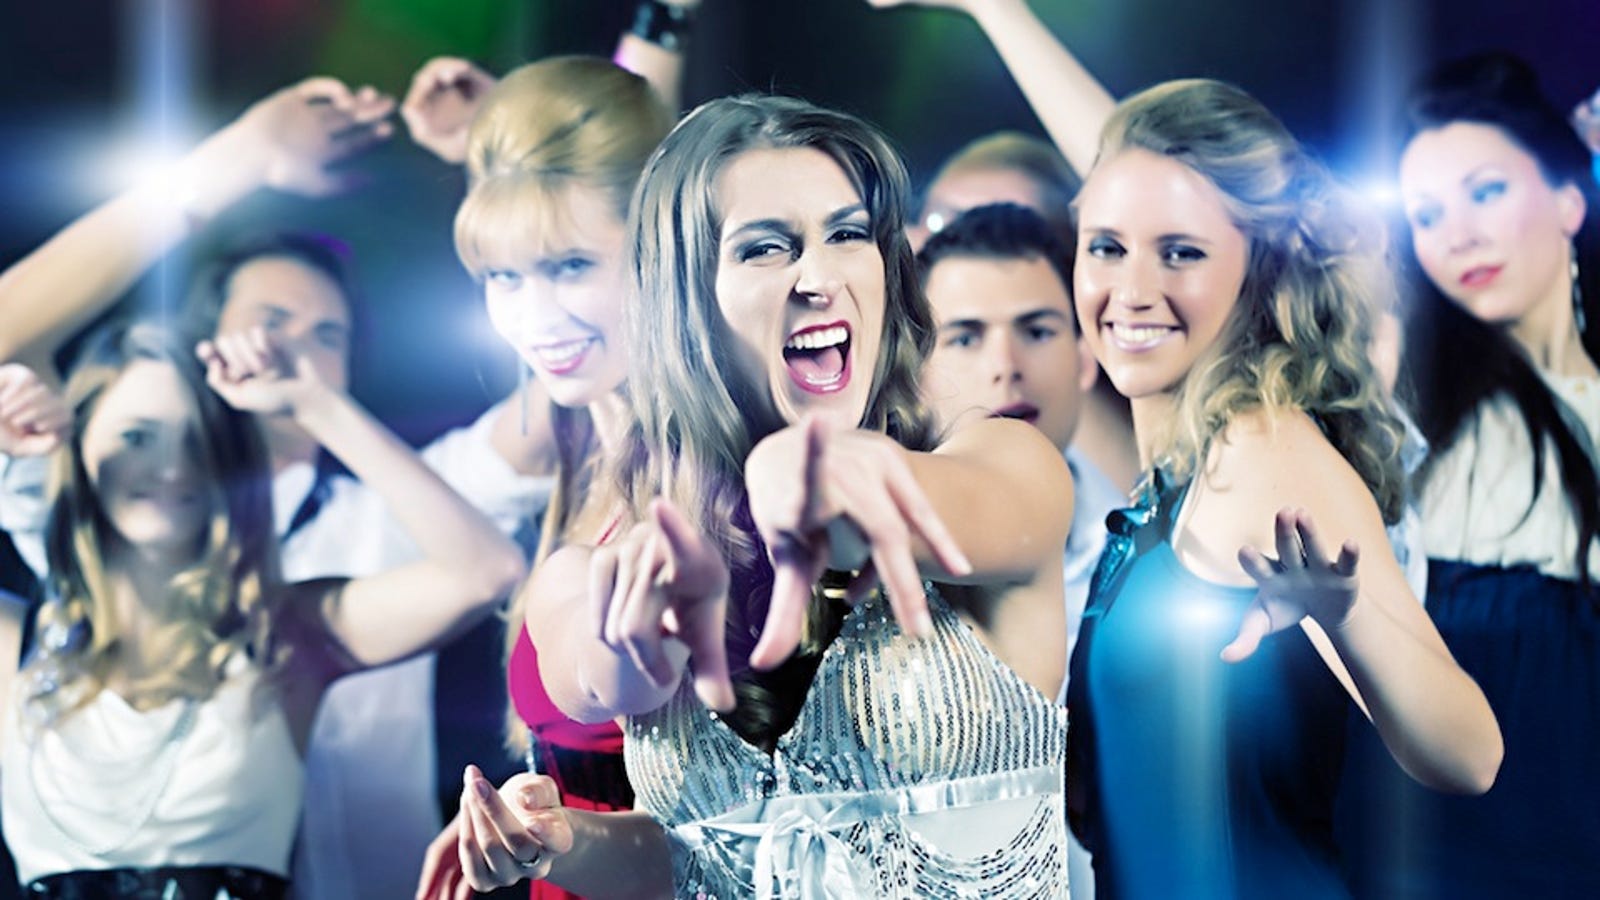 Teenage Fatties Best Not Be Fat for Prom, Says Concerned Non-Teen